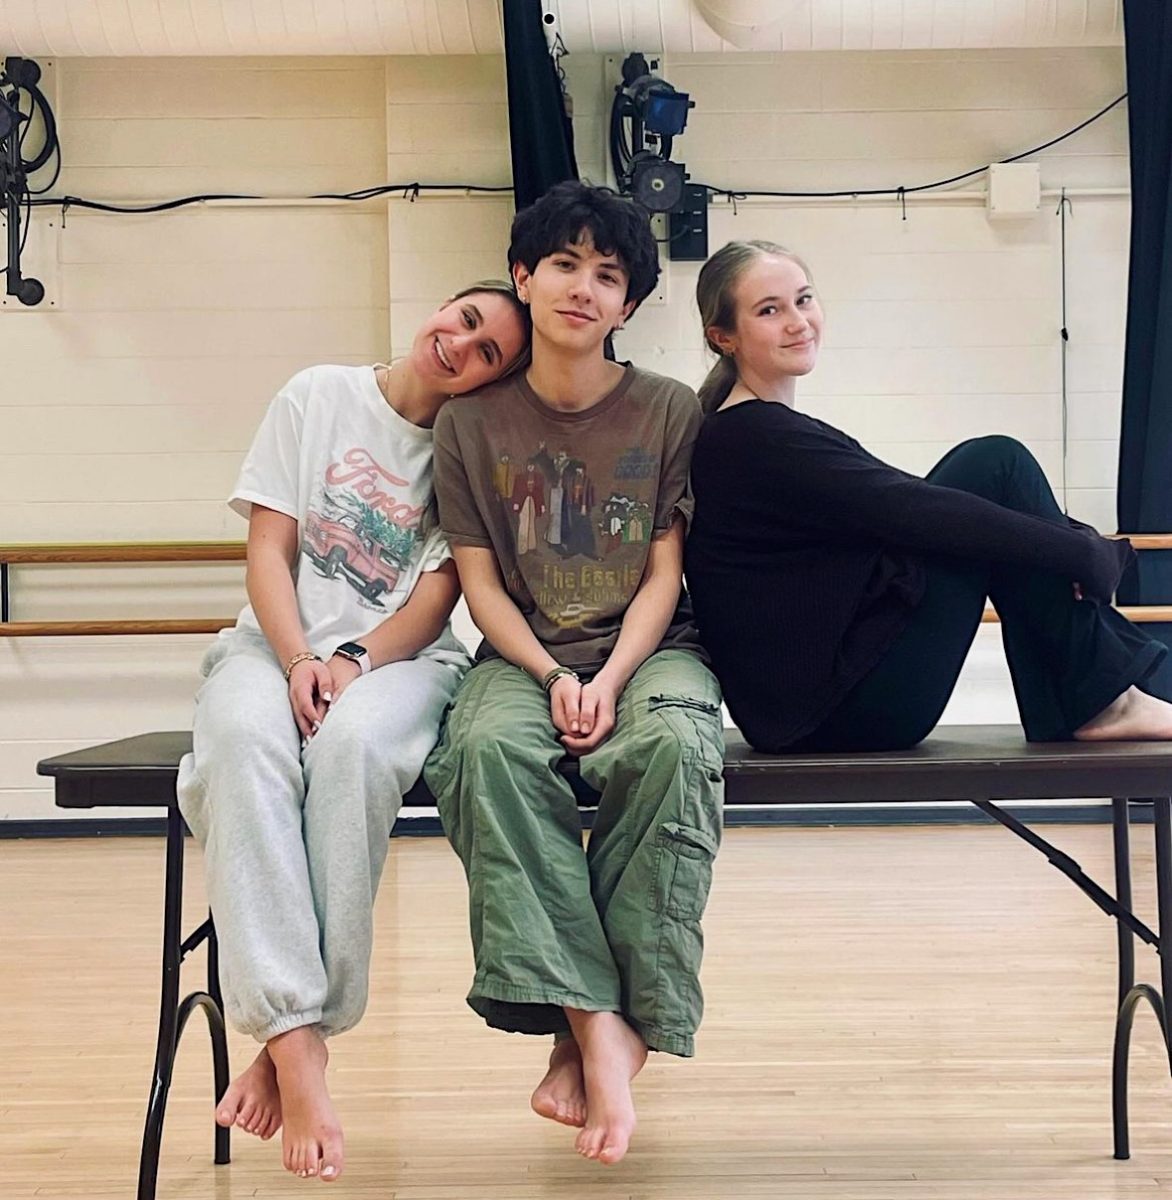 Mesterharm (left), Alcantara (middle), and Schindler (right) practicing for Dance Day